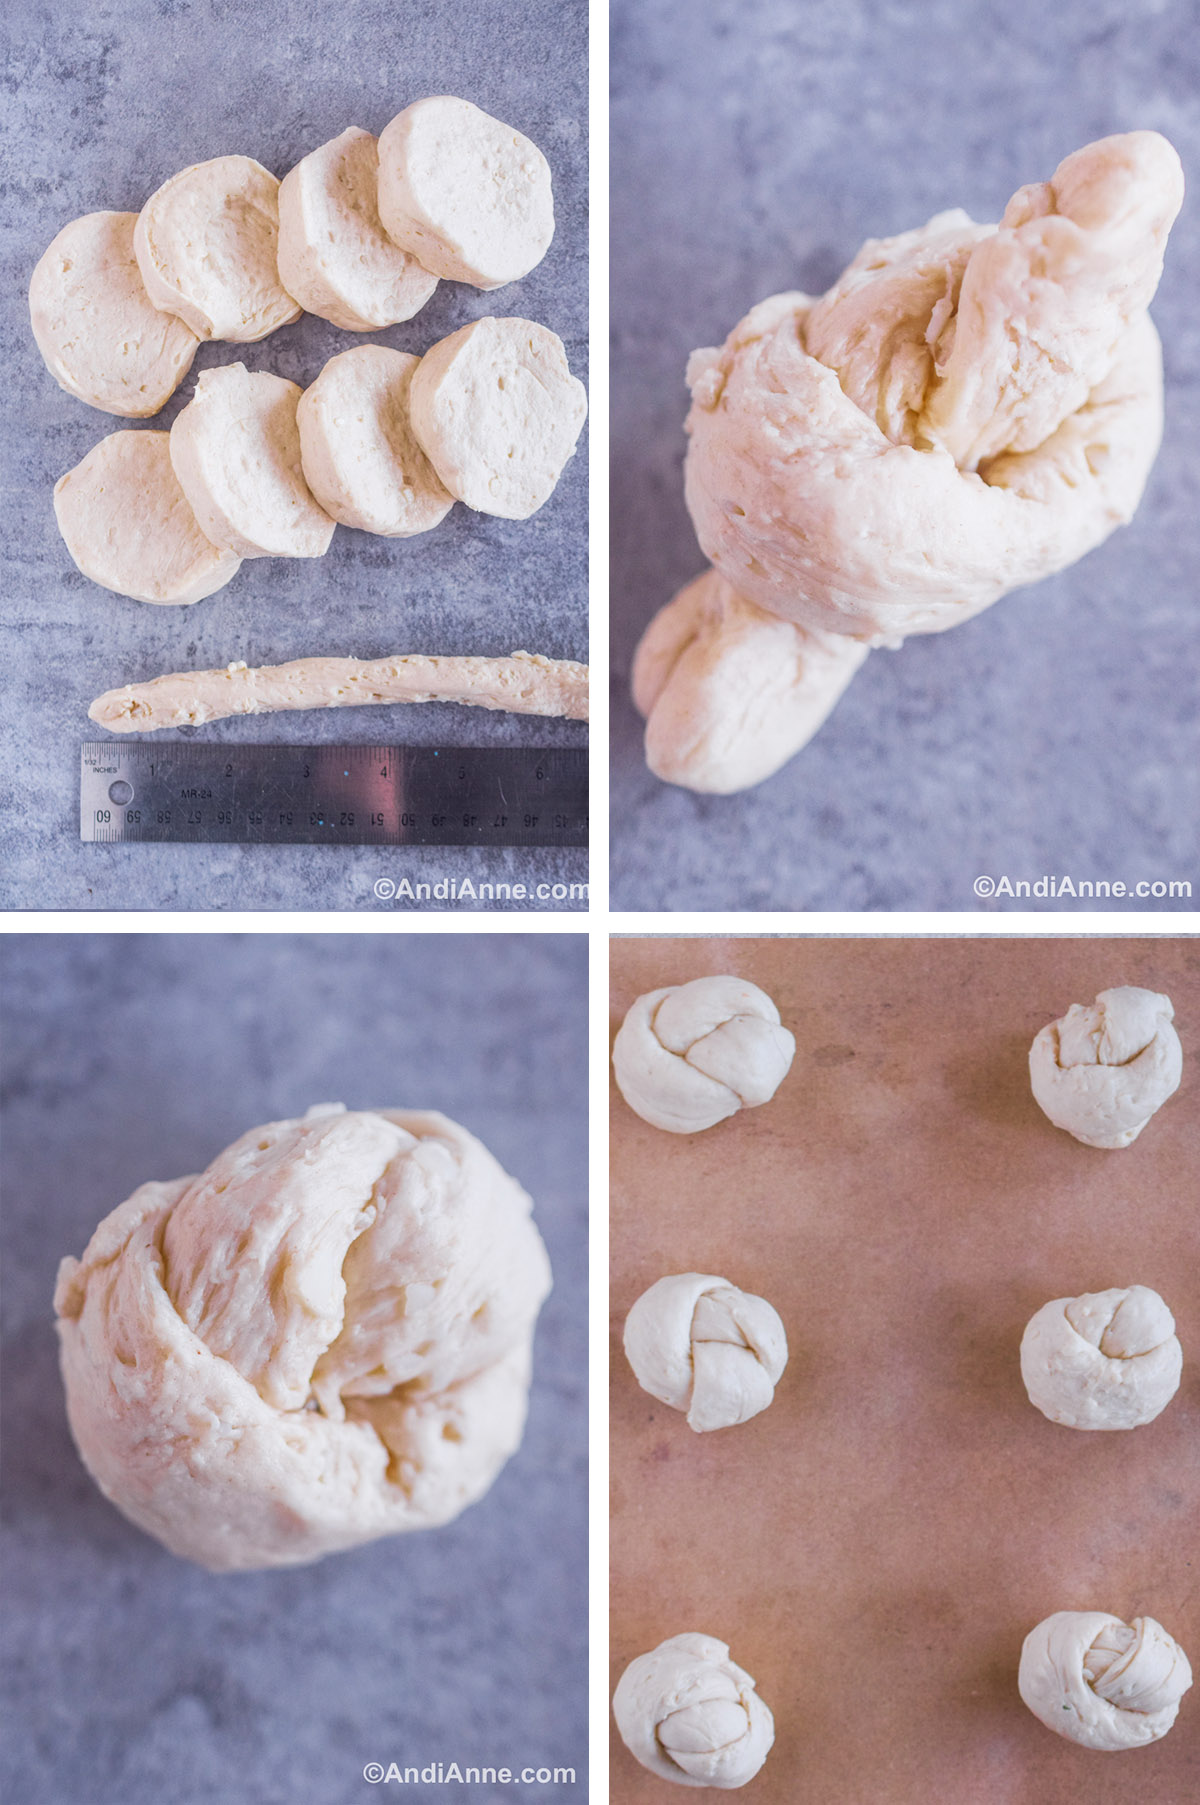 Four images together including sliced dough and a ruler. Second image is dough tied into a knot. Third image is knot with edges tucked under to form an round ball. Fourth is uncooked round knots on a baking sheet.